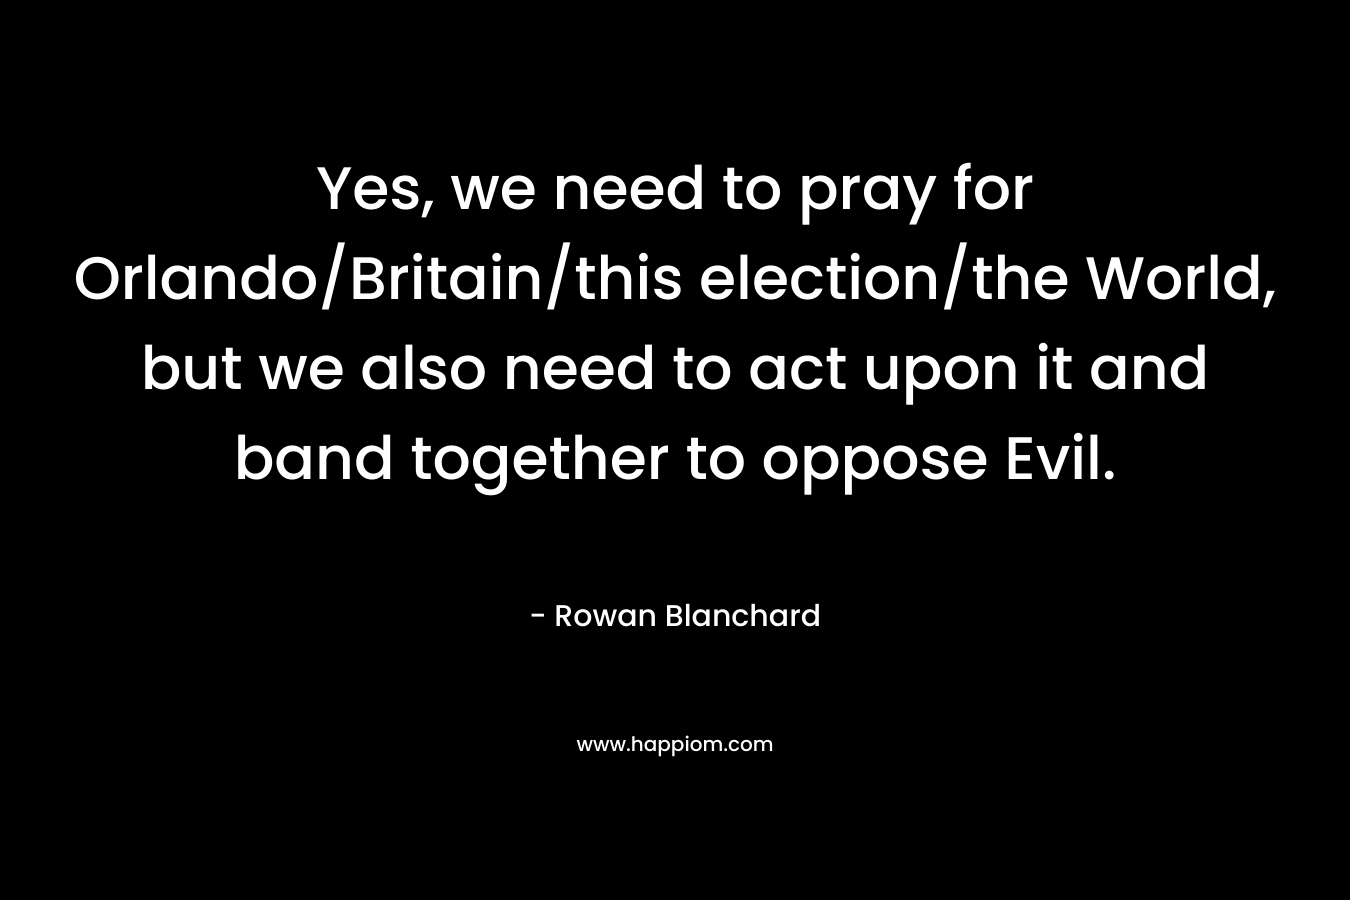 Yes, we need to pray for Orlando/Britain/this election/the World, but we also need to act upon it and band together to oppose Evil. – Rowan Blanchard